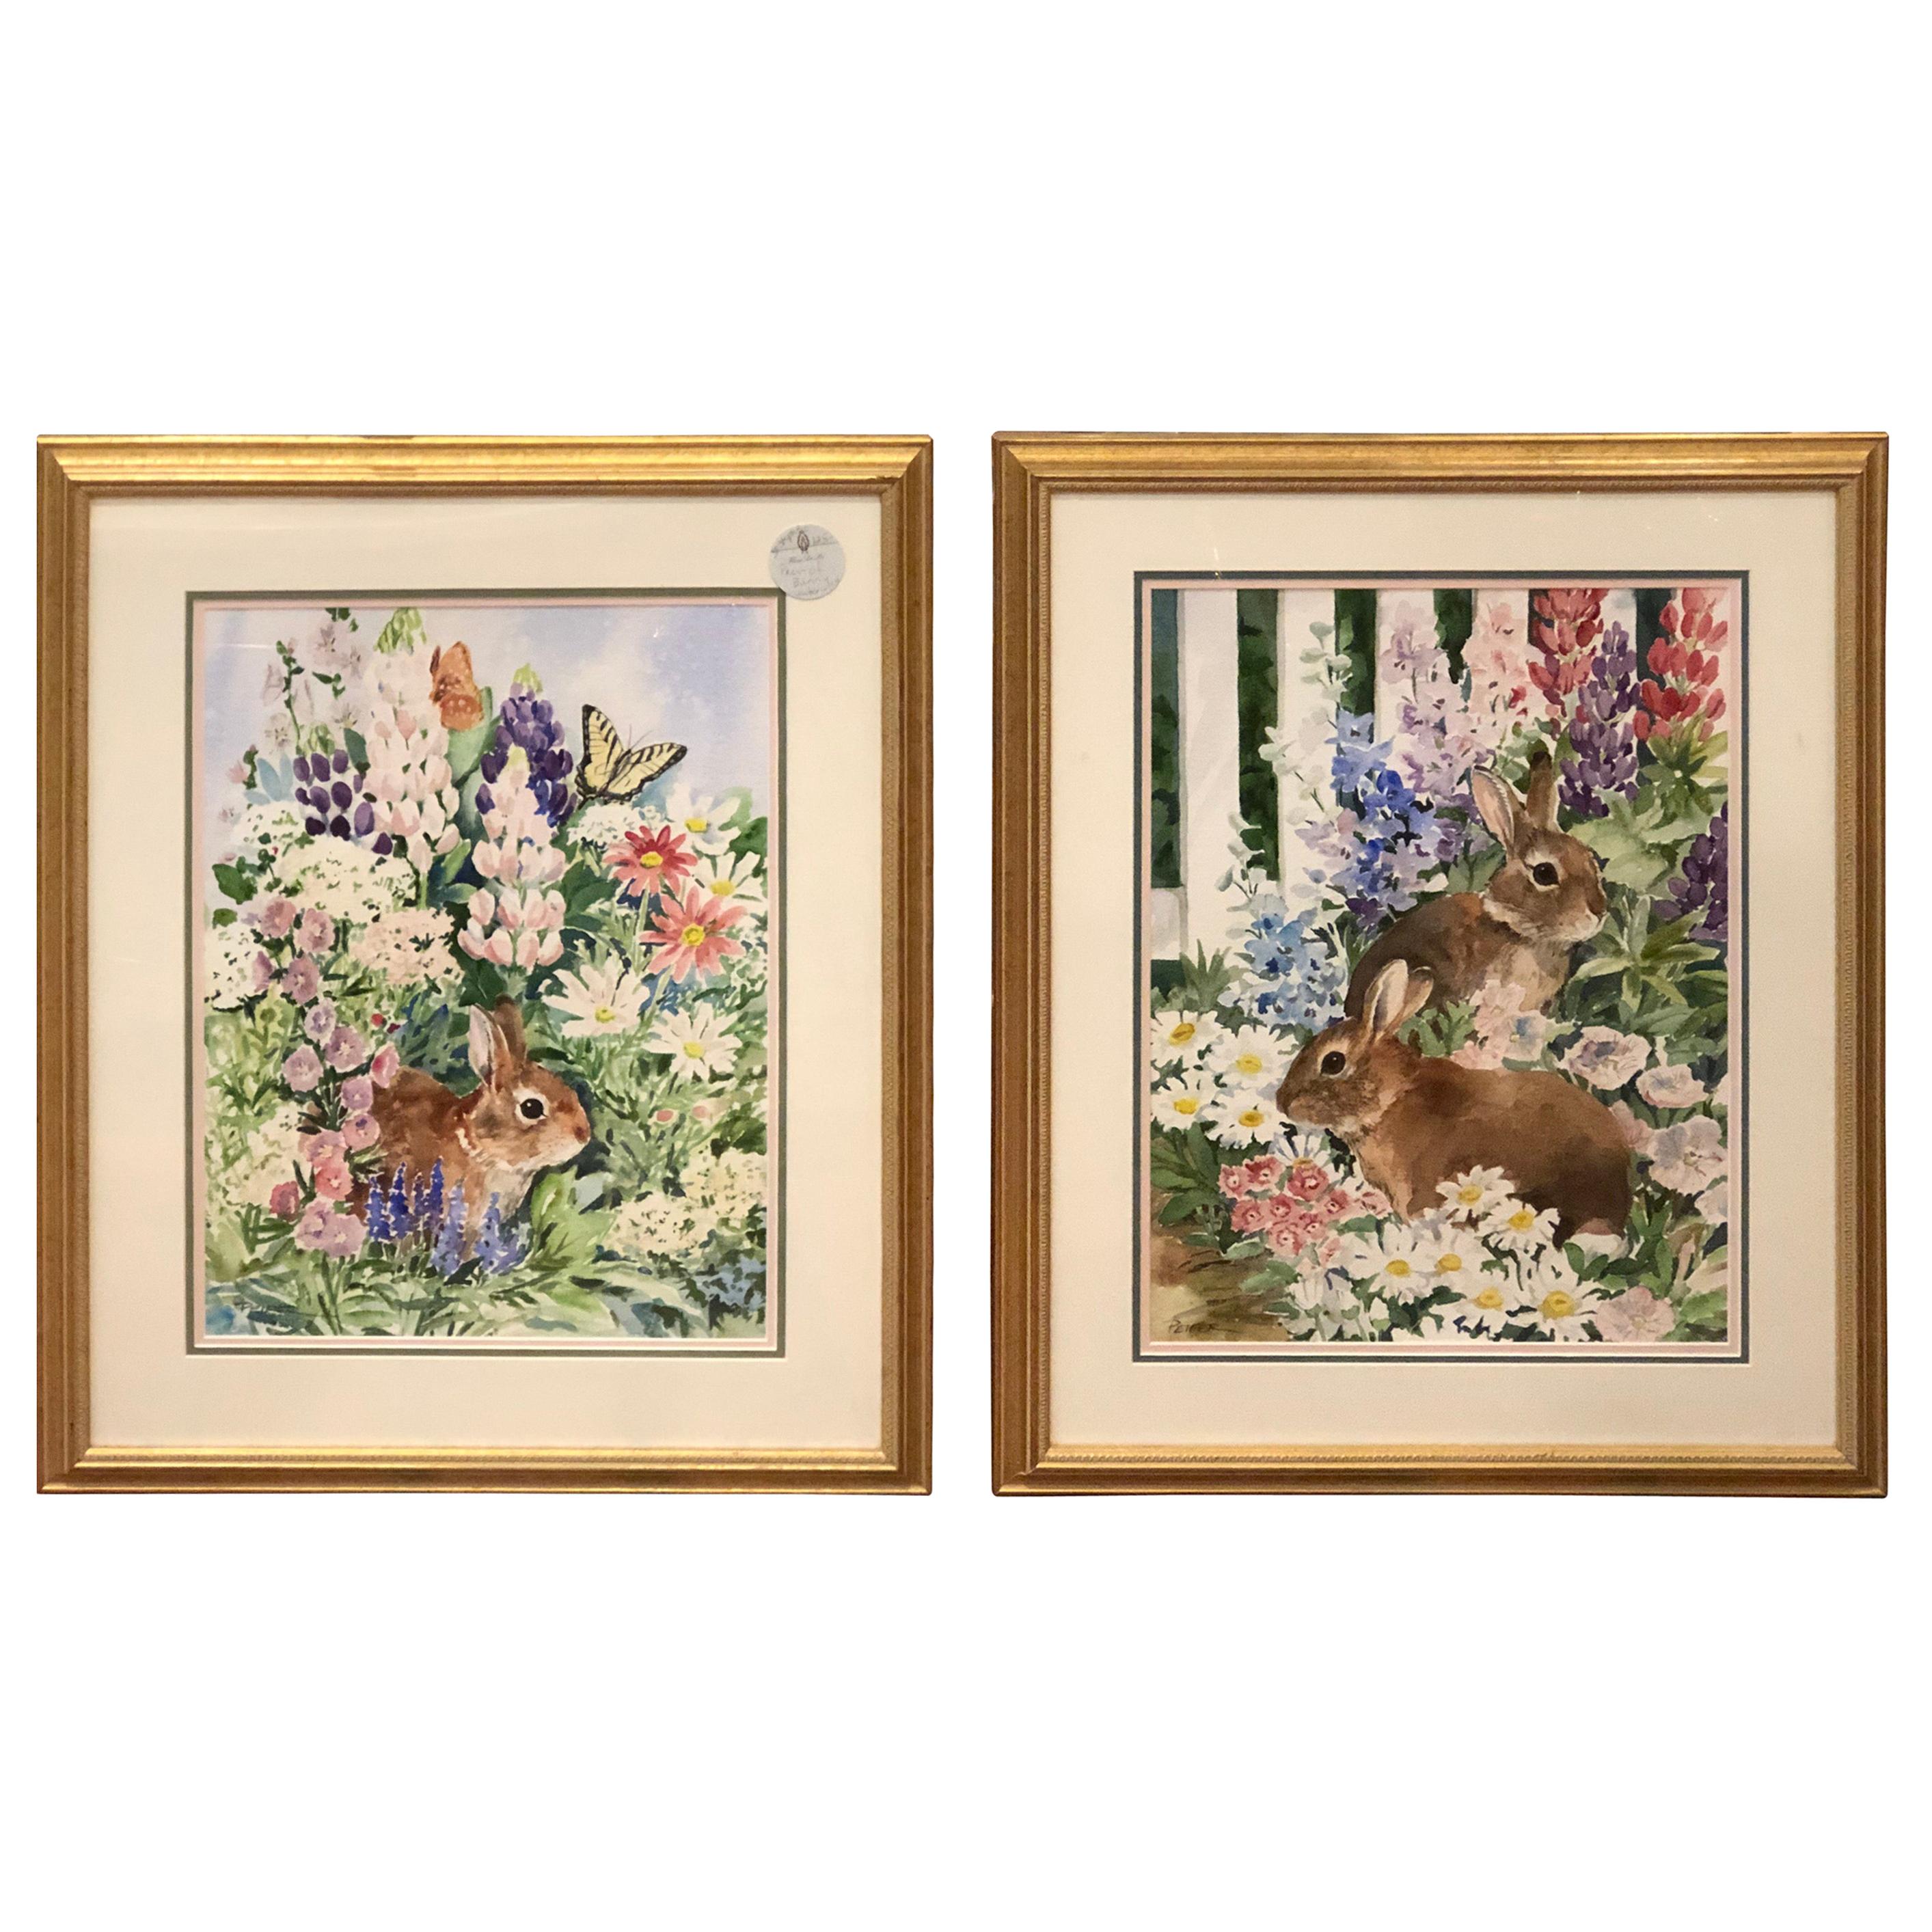 SOLD-Pair of Signed Watercolors by Susan Peifer